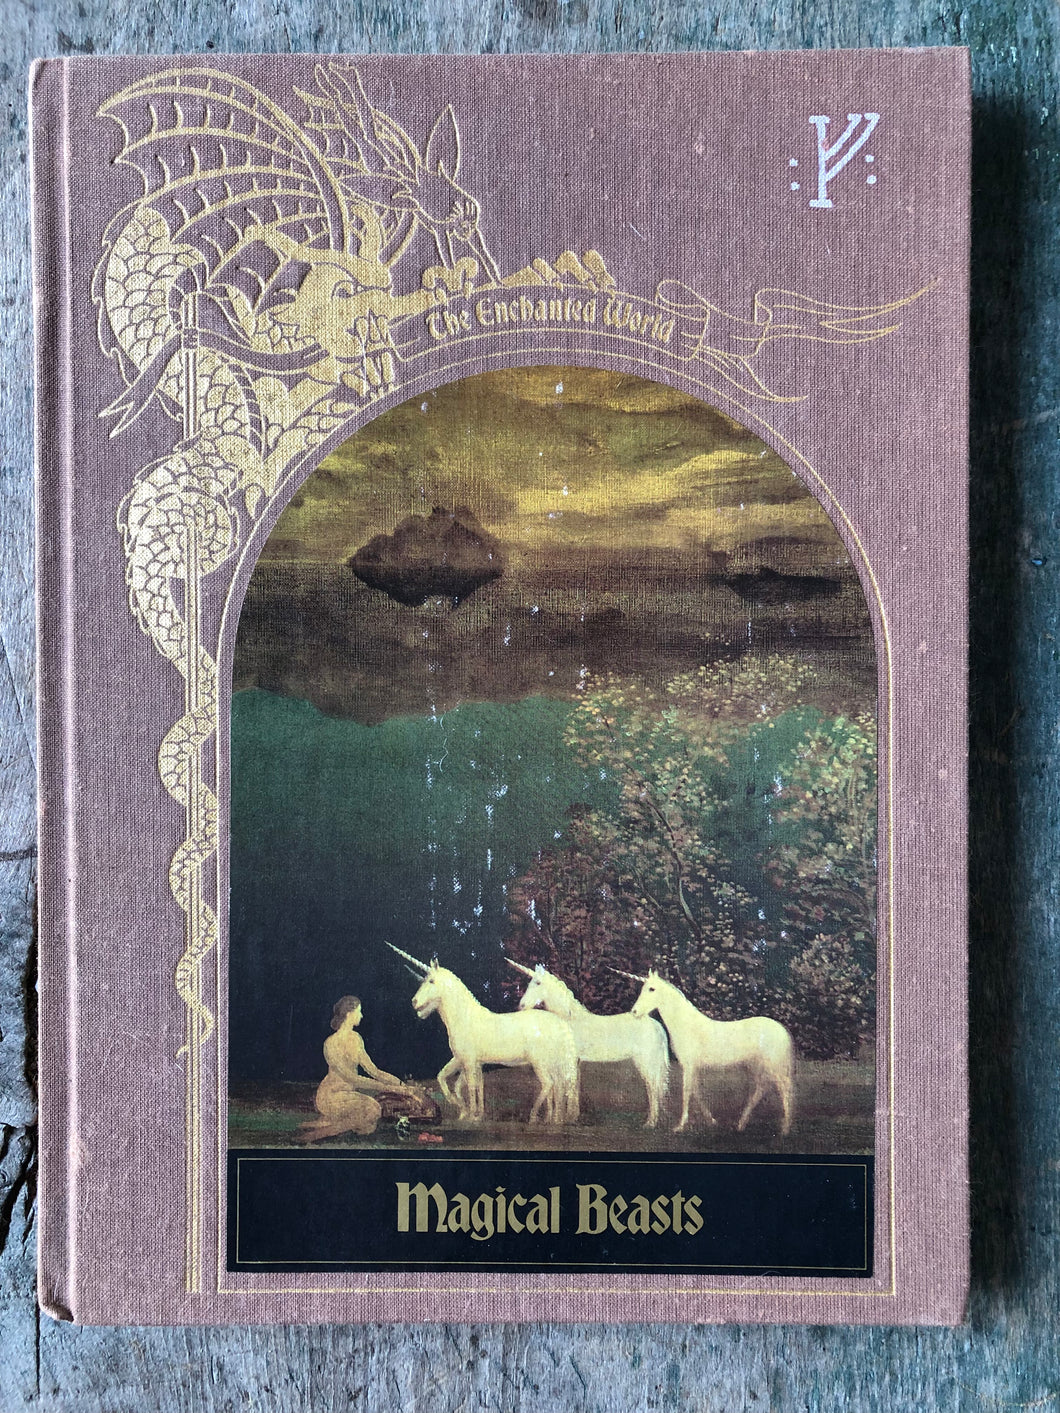 The Enchanted World: Magical Beasts by the Editors of Time-Life Books